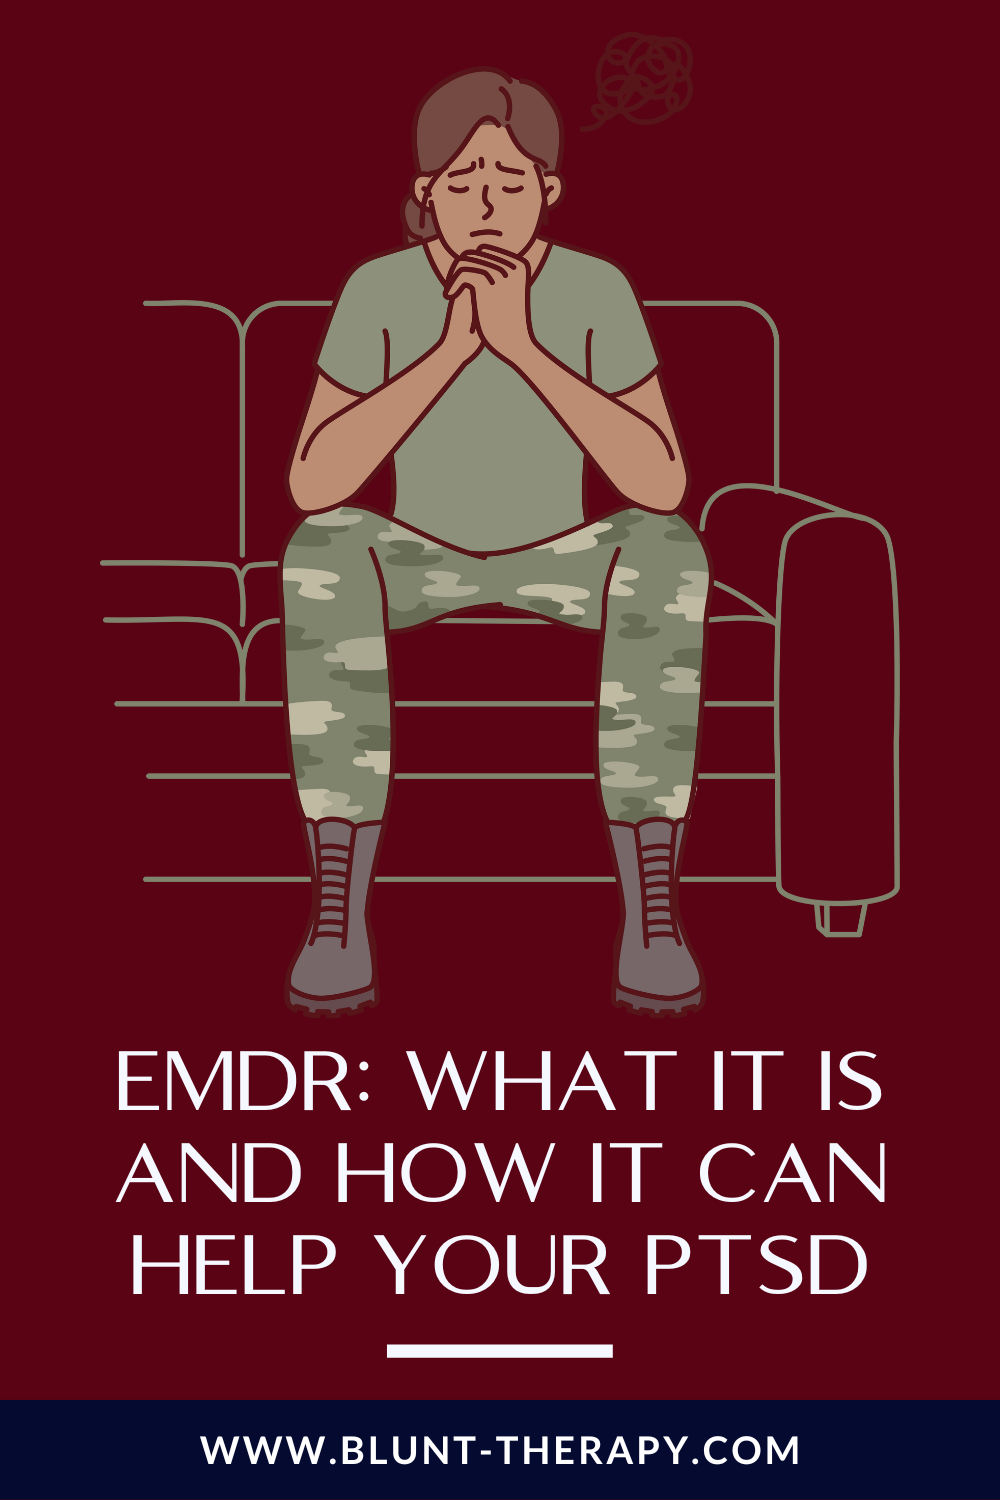 EMDR treatment: What It Is and How It Can Help Your PTSD